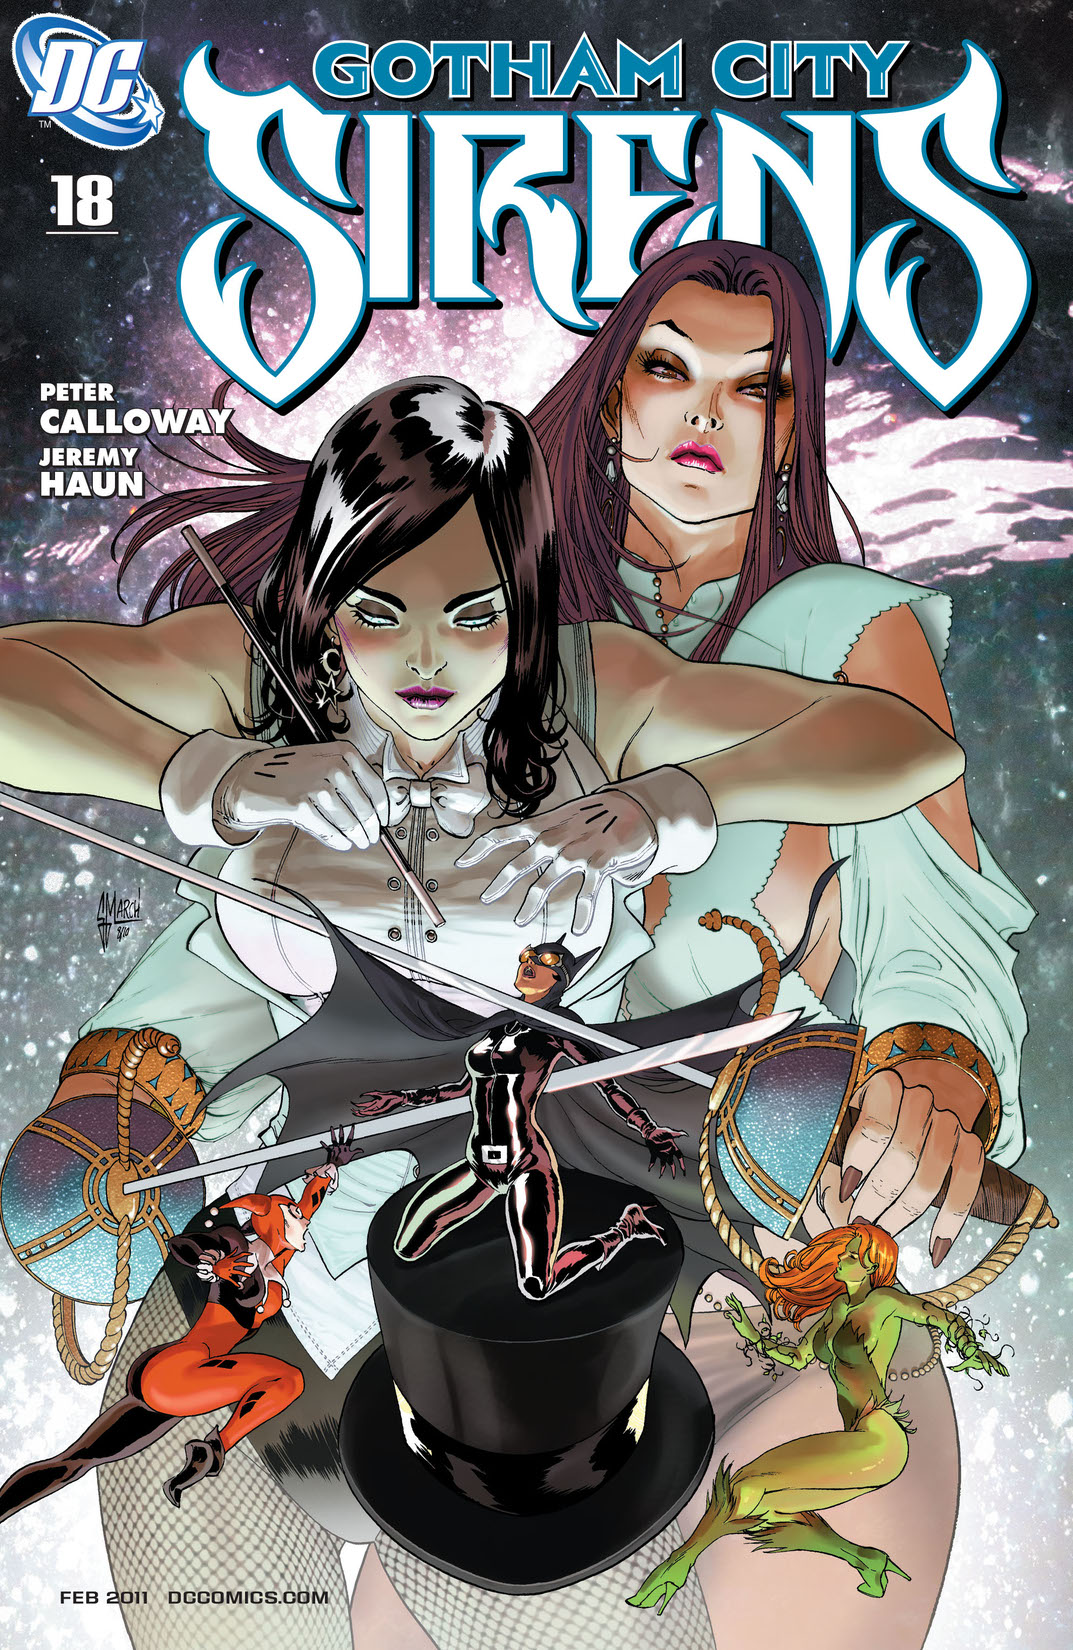 Gotham City Sirens #18 preview images